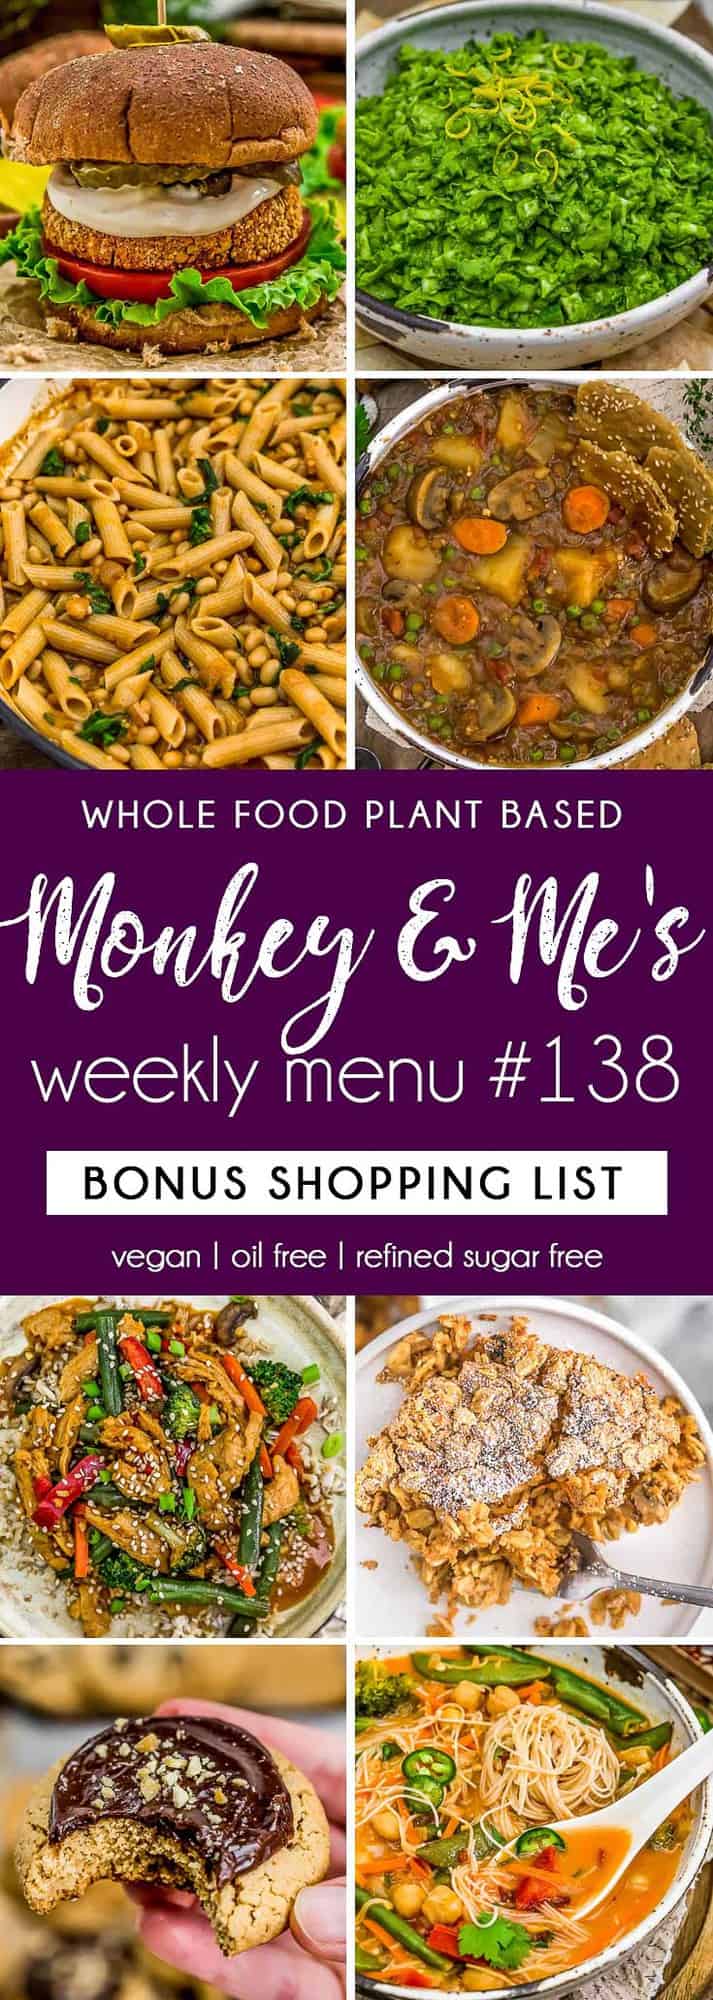 Monkey and Me's Menu 137 featuring 8 recipes